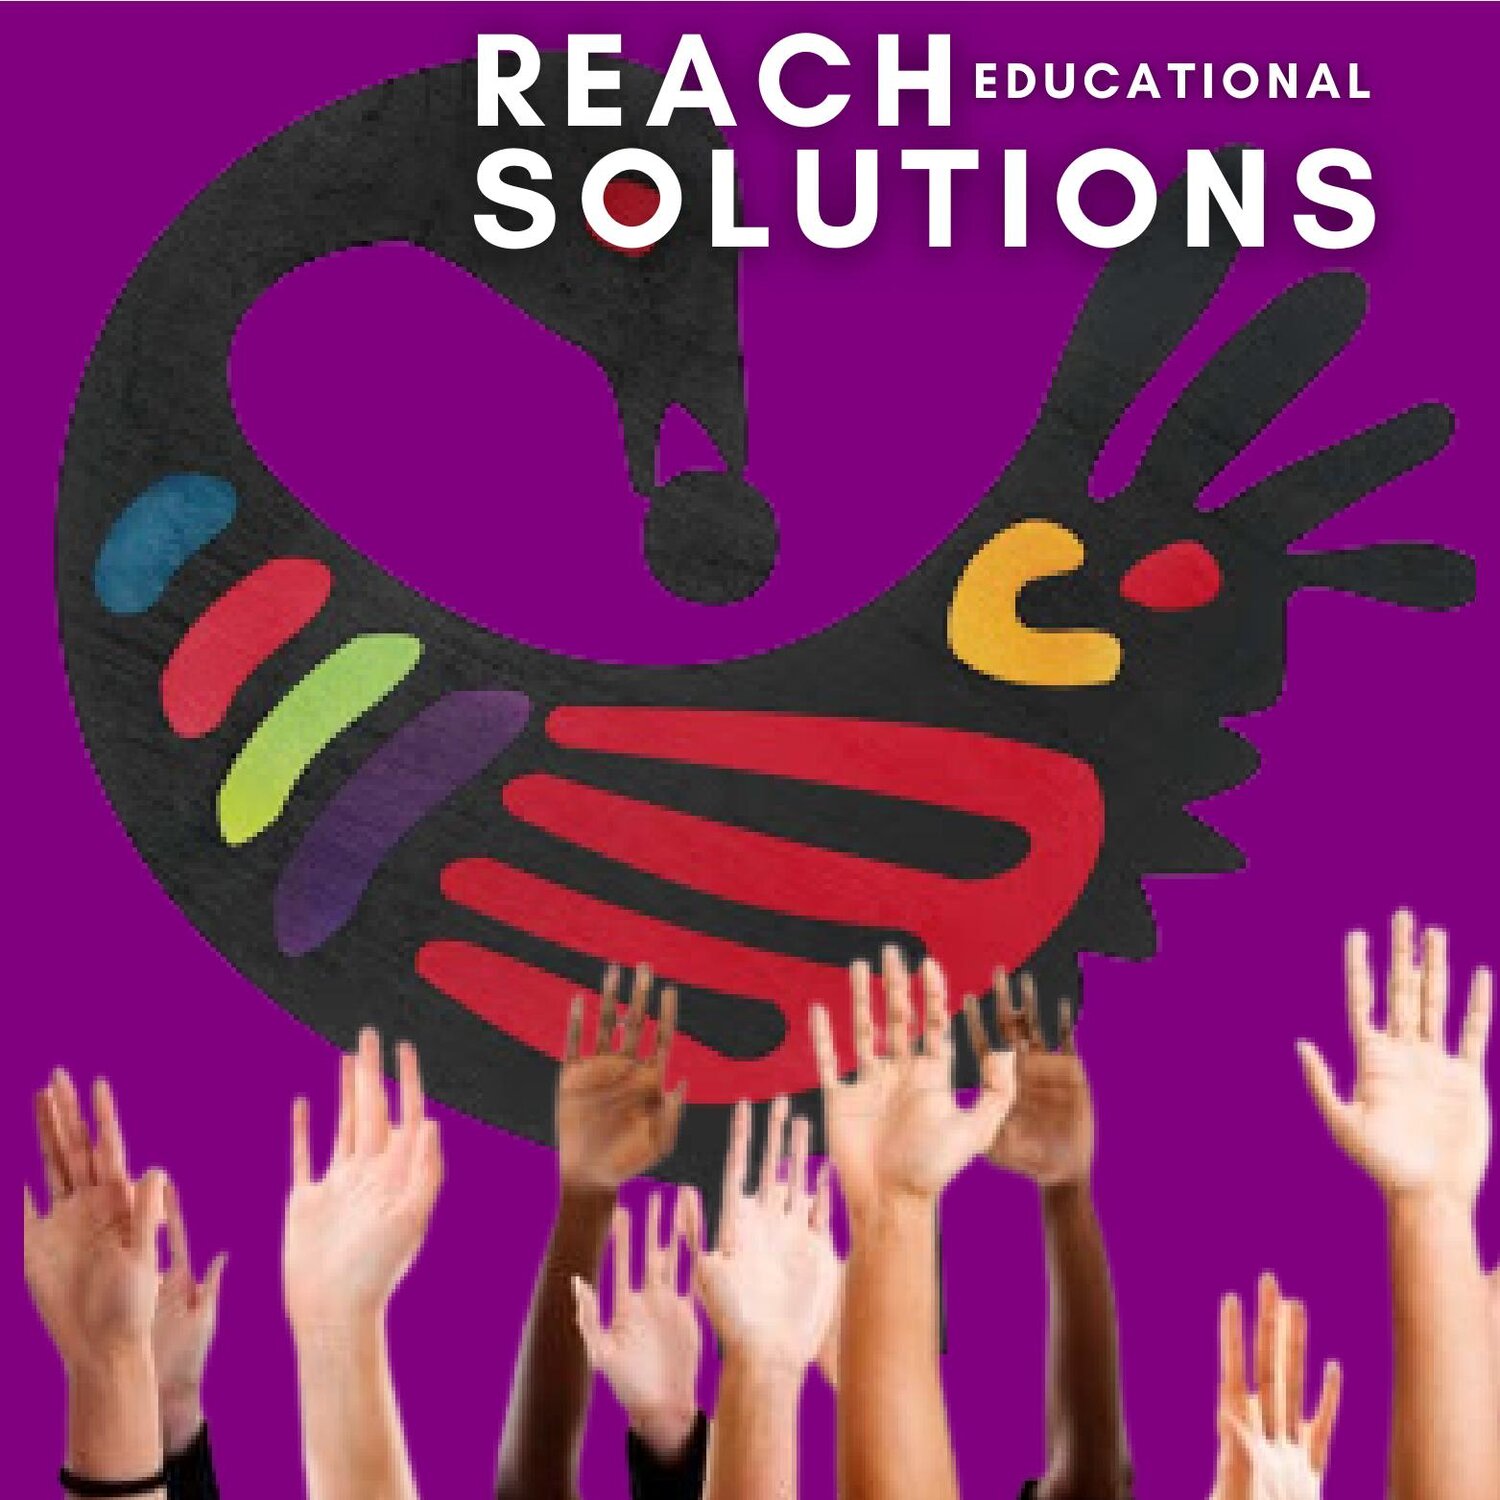 REACH Educational Solutions